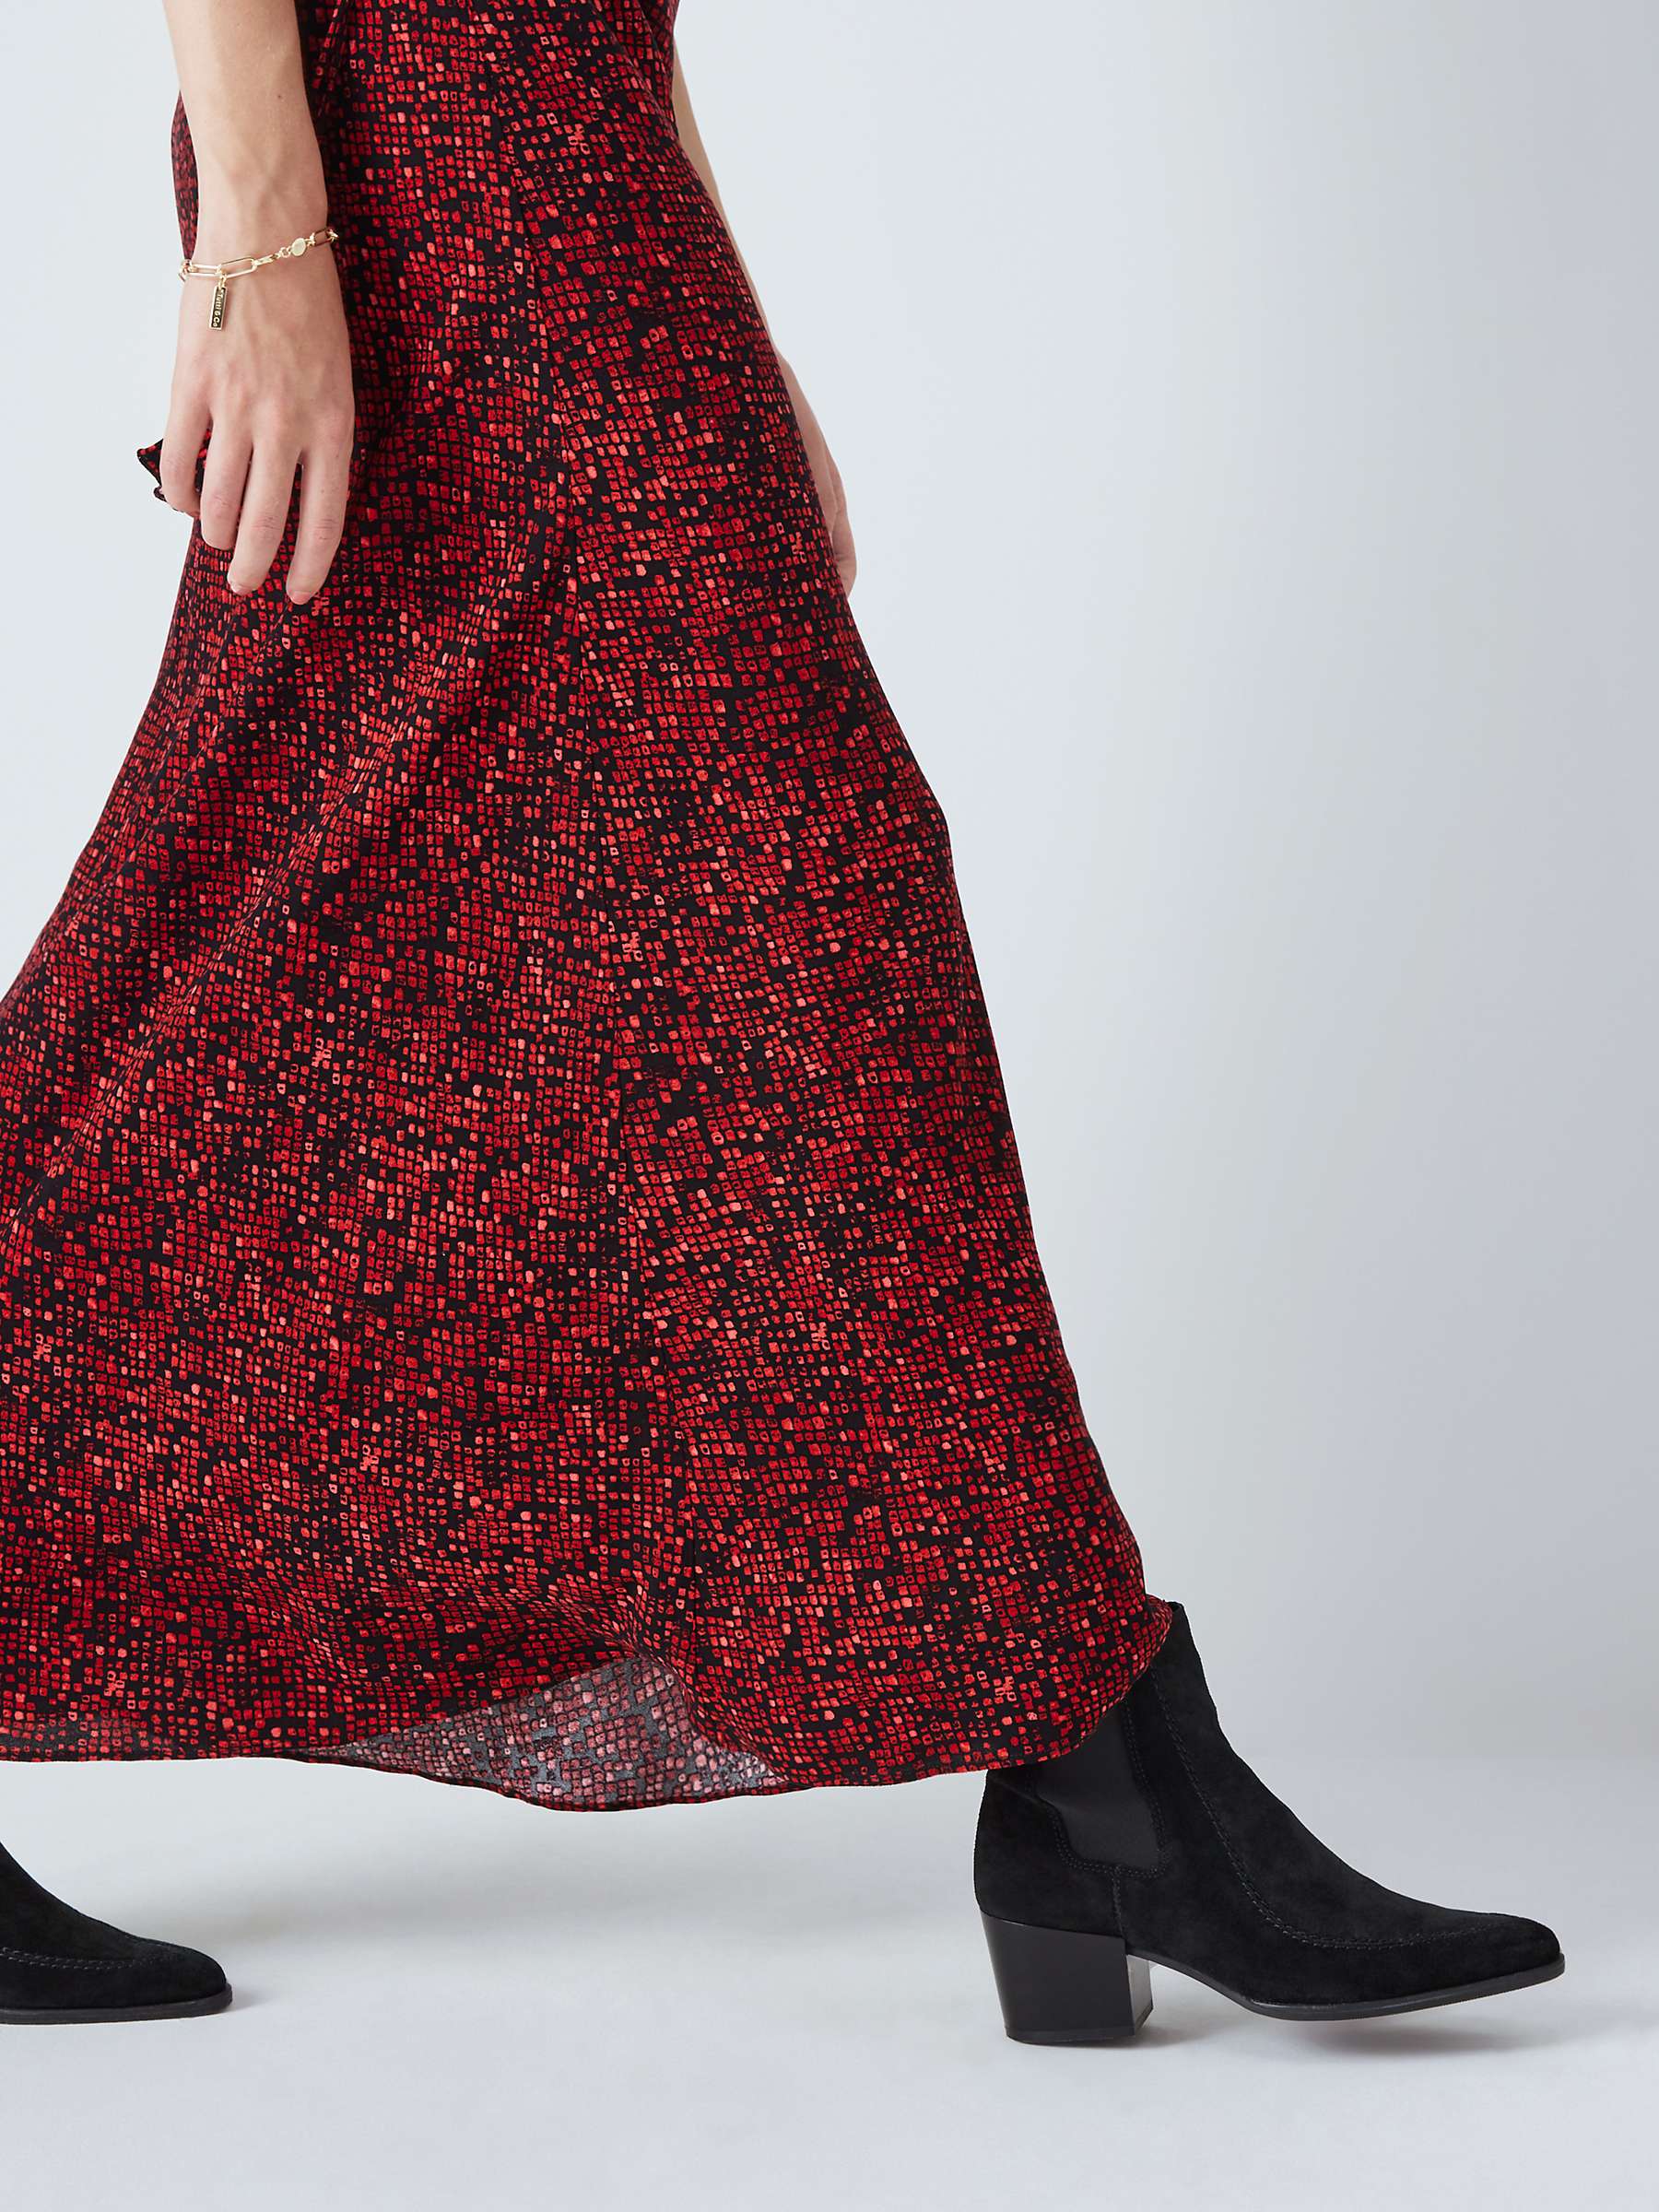 Buy AND/OR Nyla Shibori Skirt, Red/Multi Online at johnlewis.com